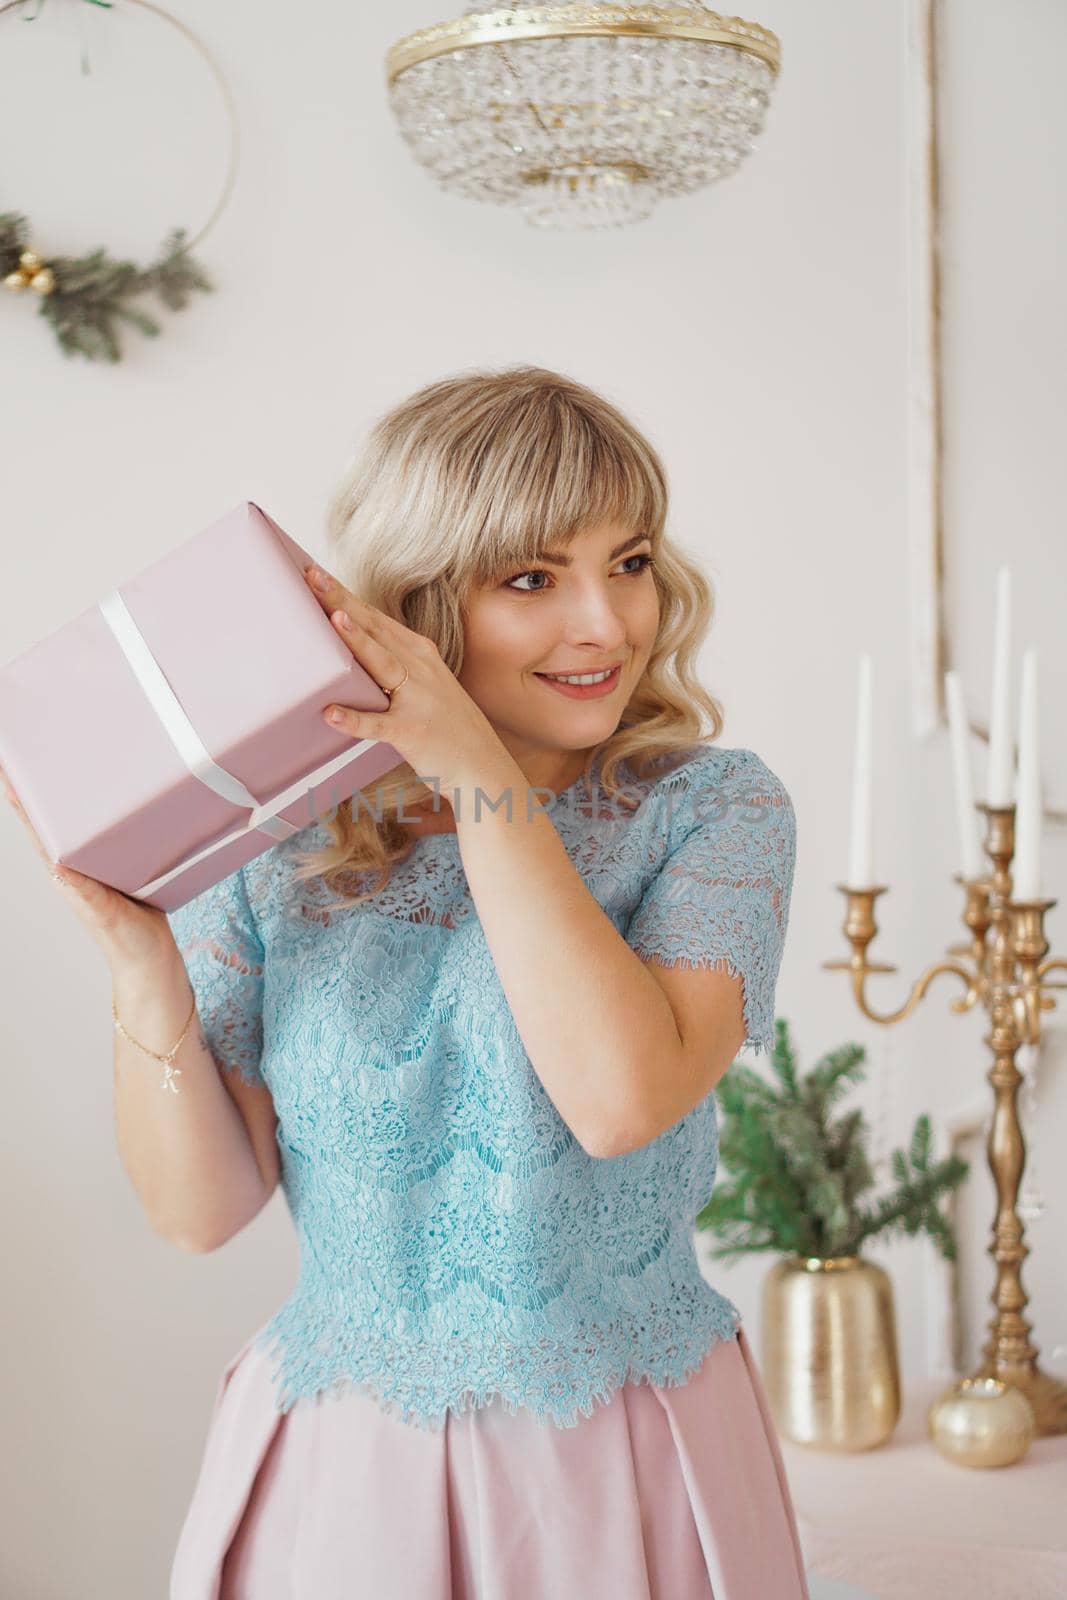 Lovely young woman with elegant style sitting indoor near decorated tree with pink Christmas presents